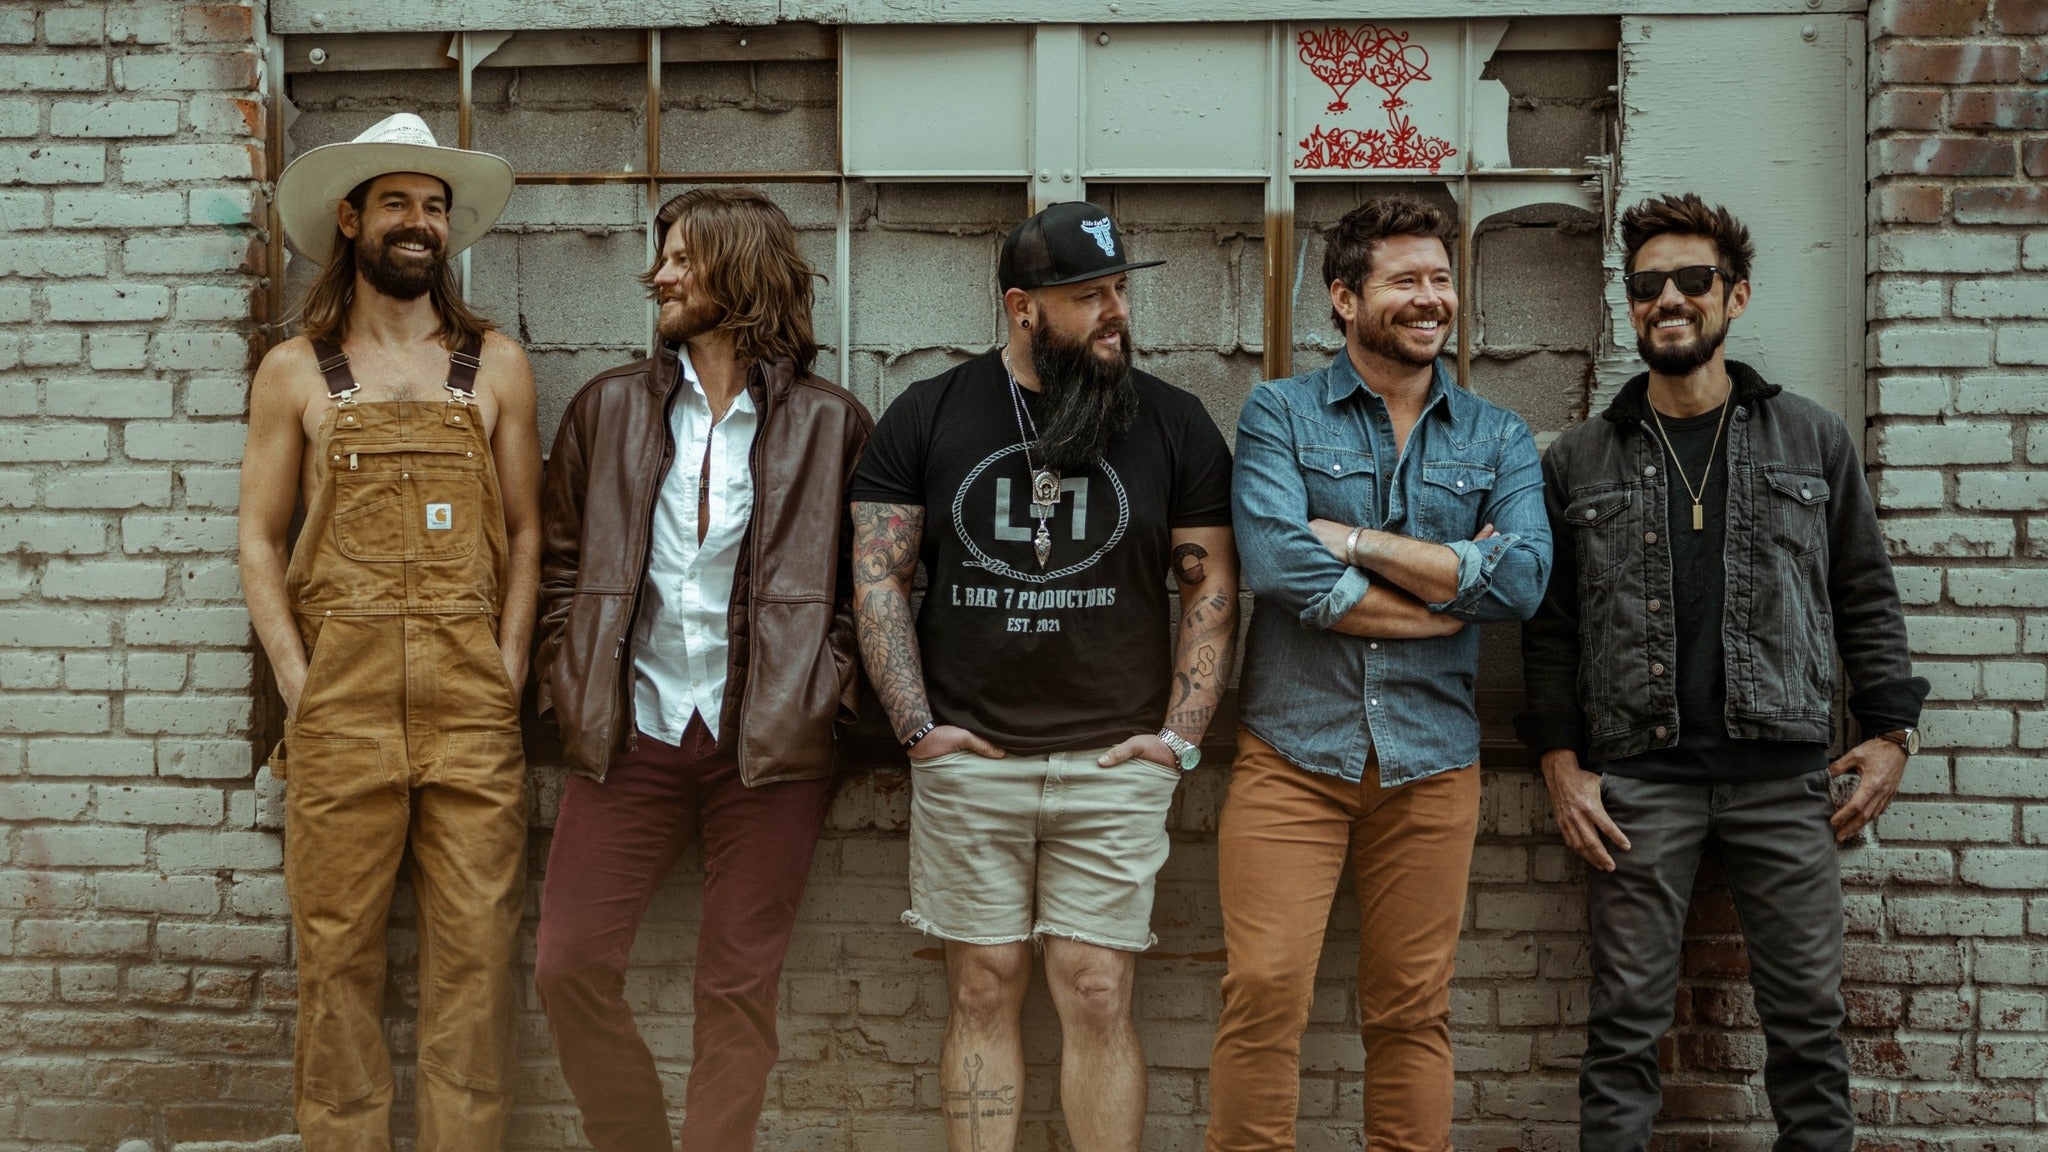 Shane Smith and the Saints in New York promo photo for Citi® Cardmember presale offer code